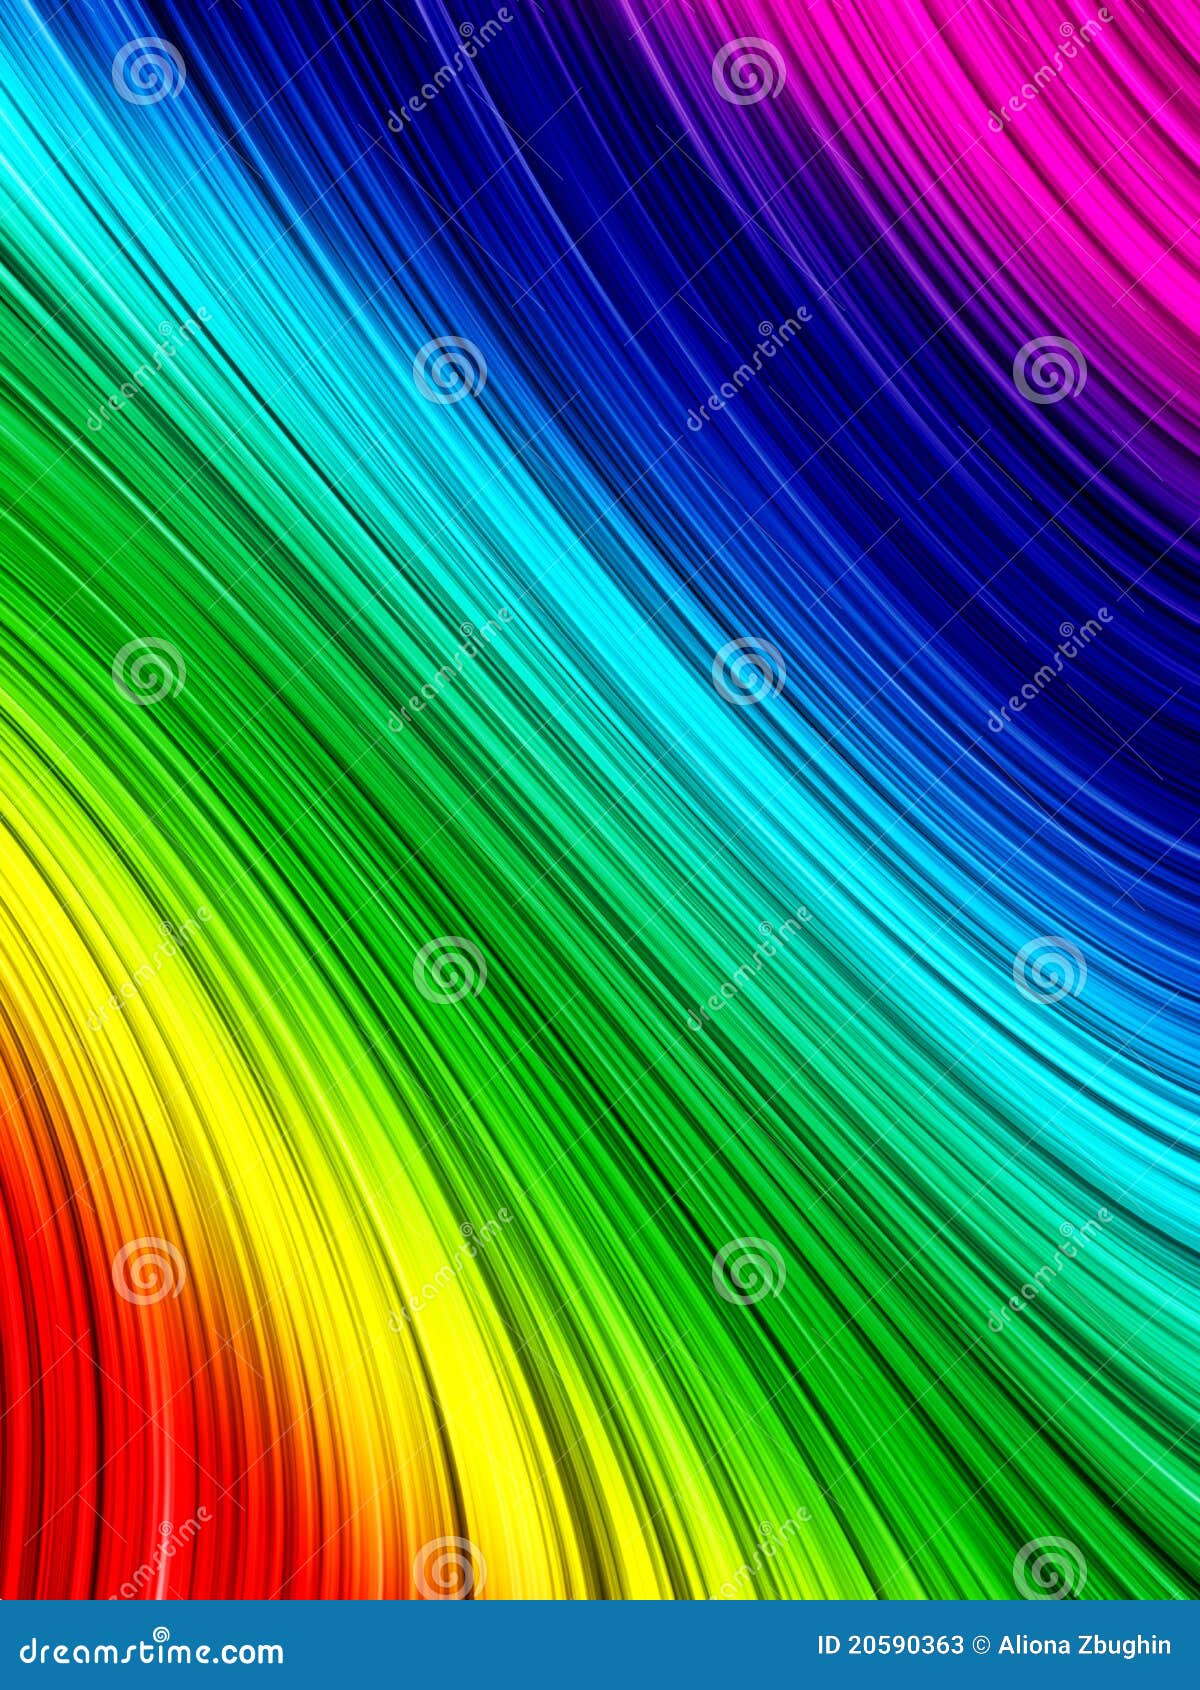 powerpoint backgrounds tumblr Backgrounds Gallery Rainbow  Viewing